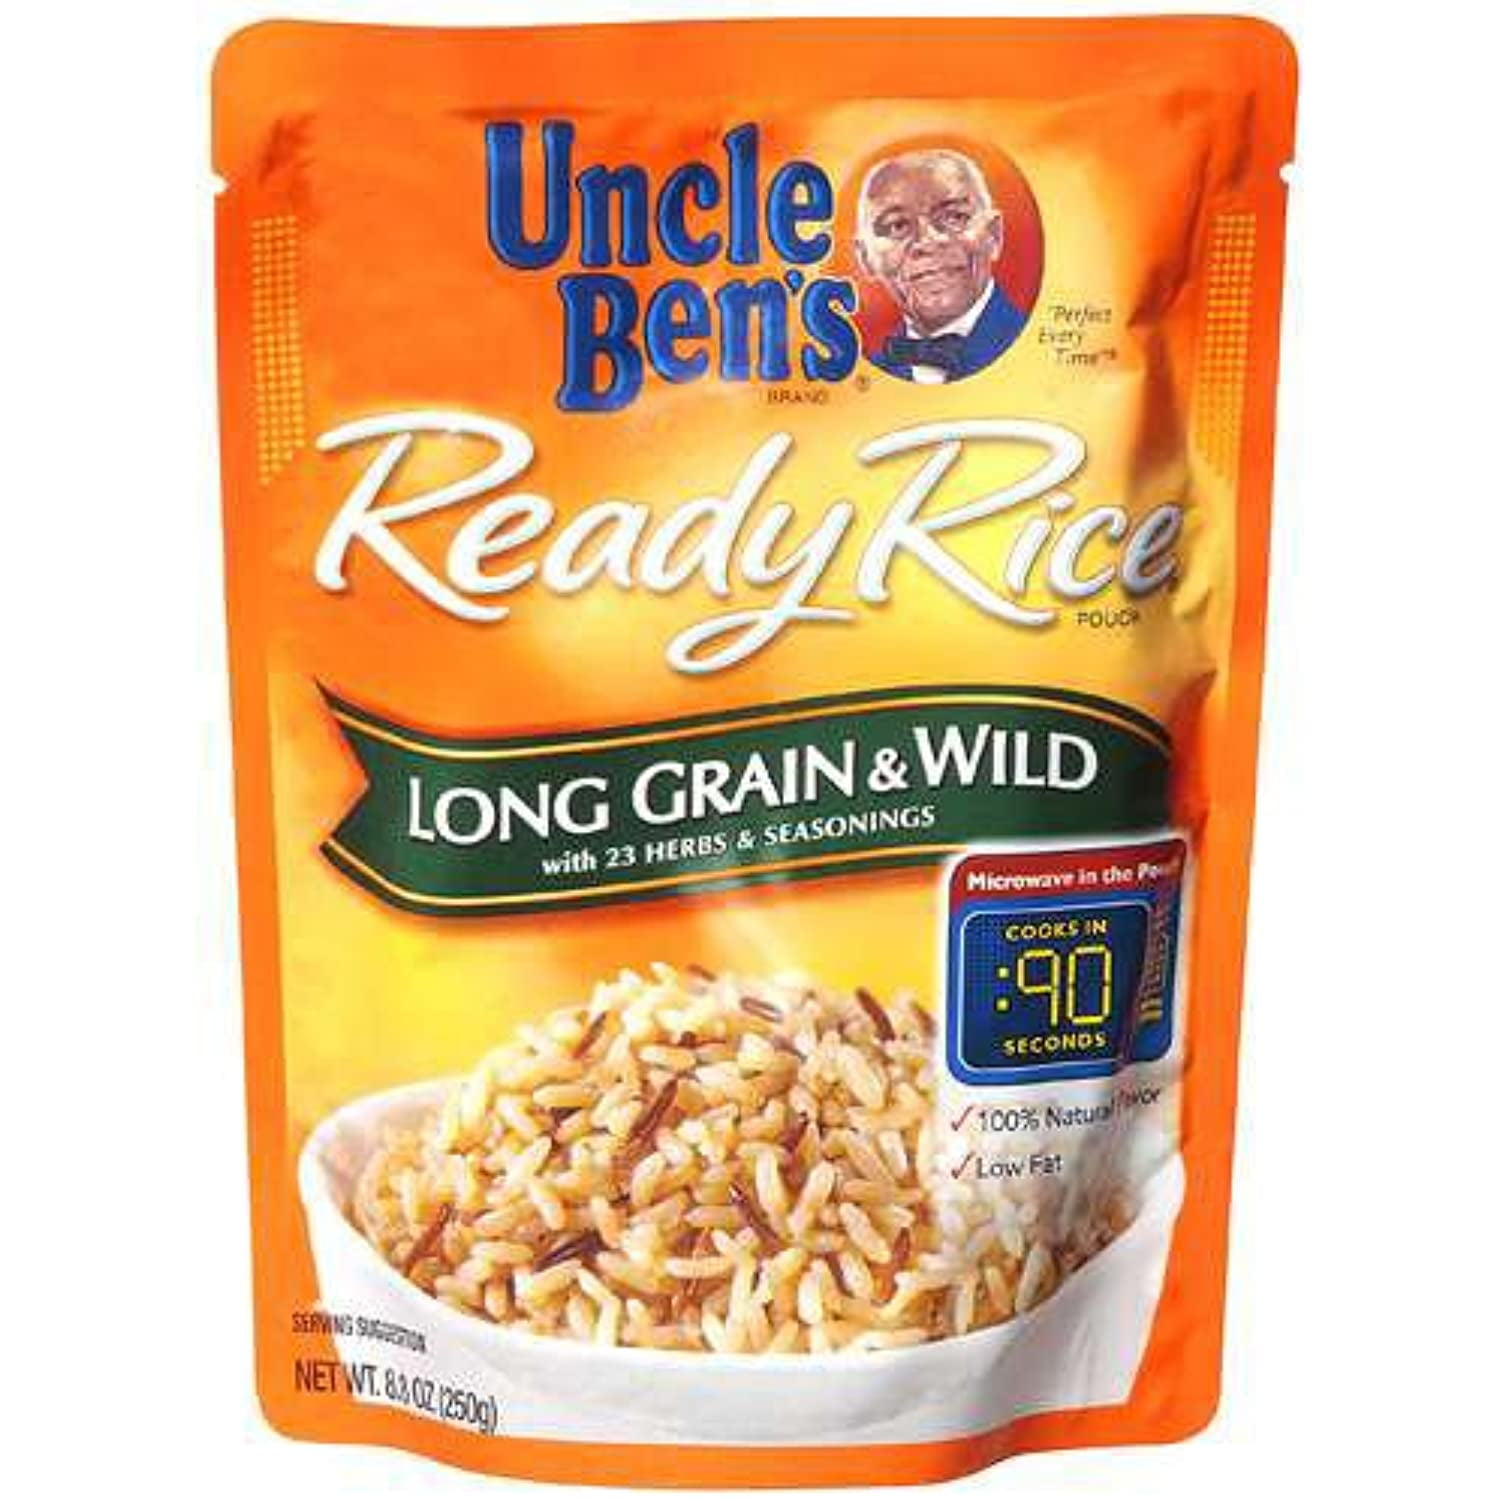 Uncle Bens Ready Rice Long Grain & Wild, 8.8-Ounce Packages (Pack Of 6 ...